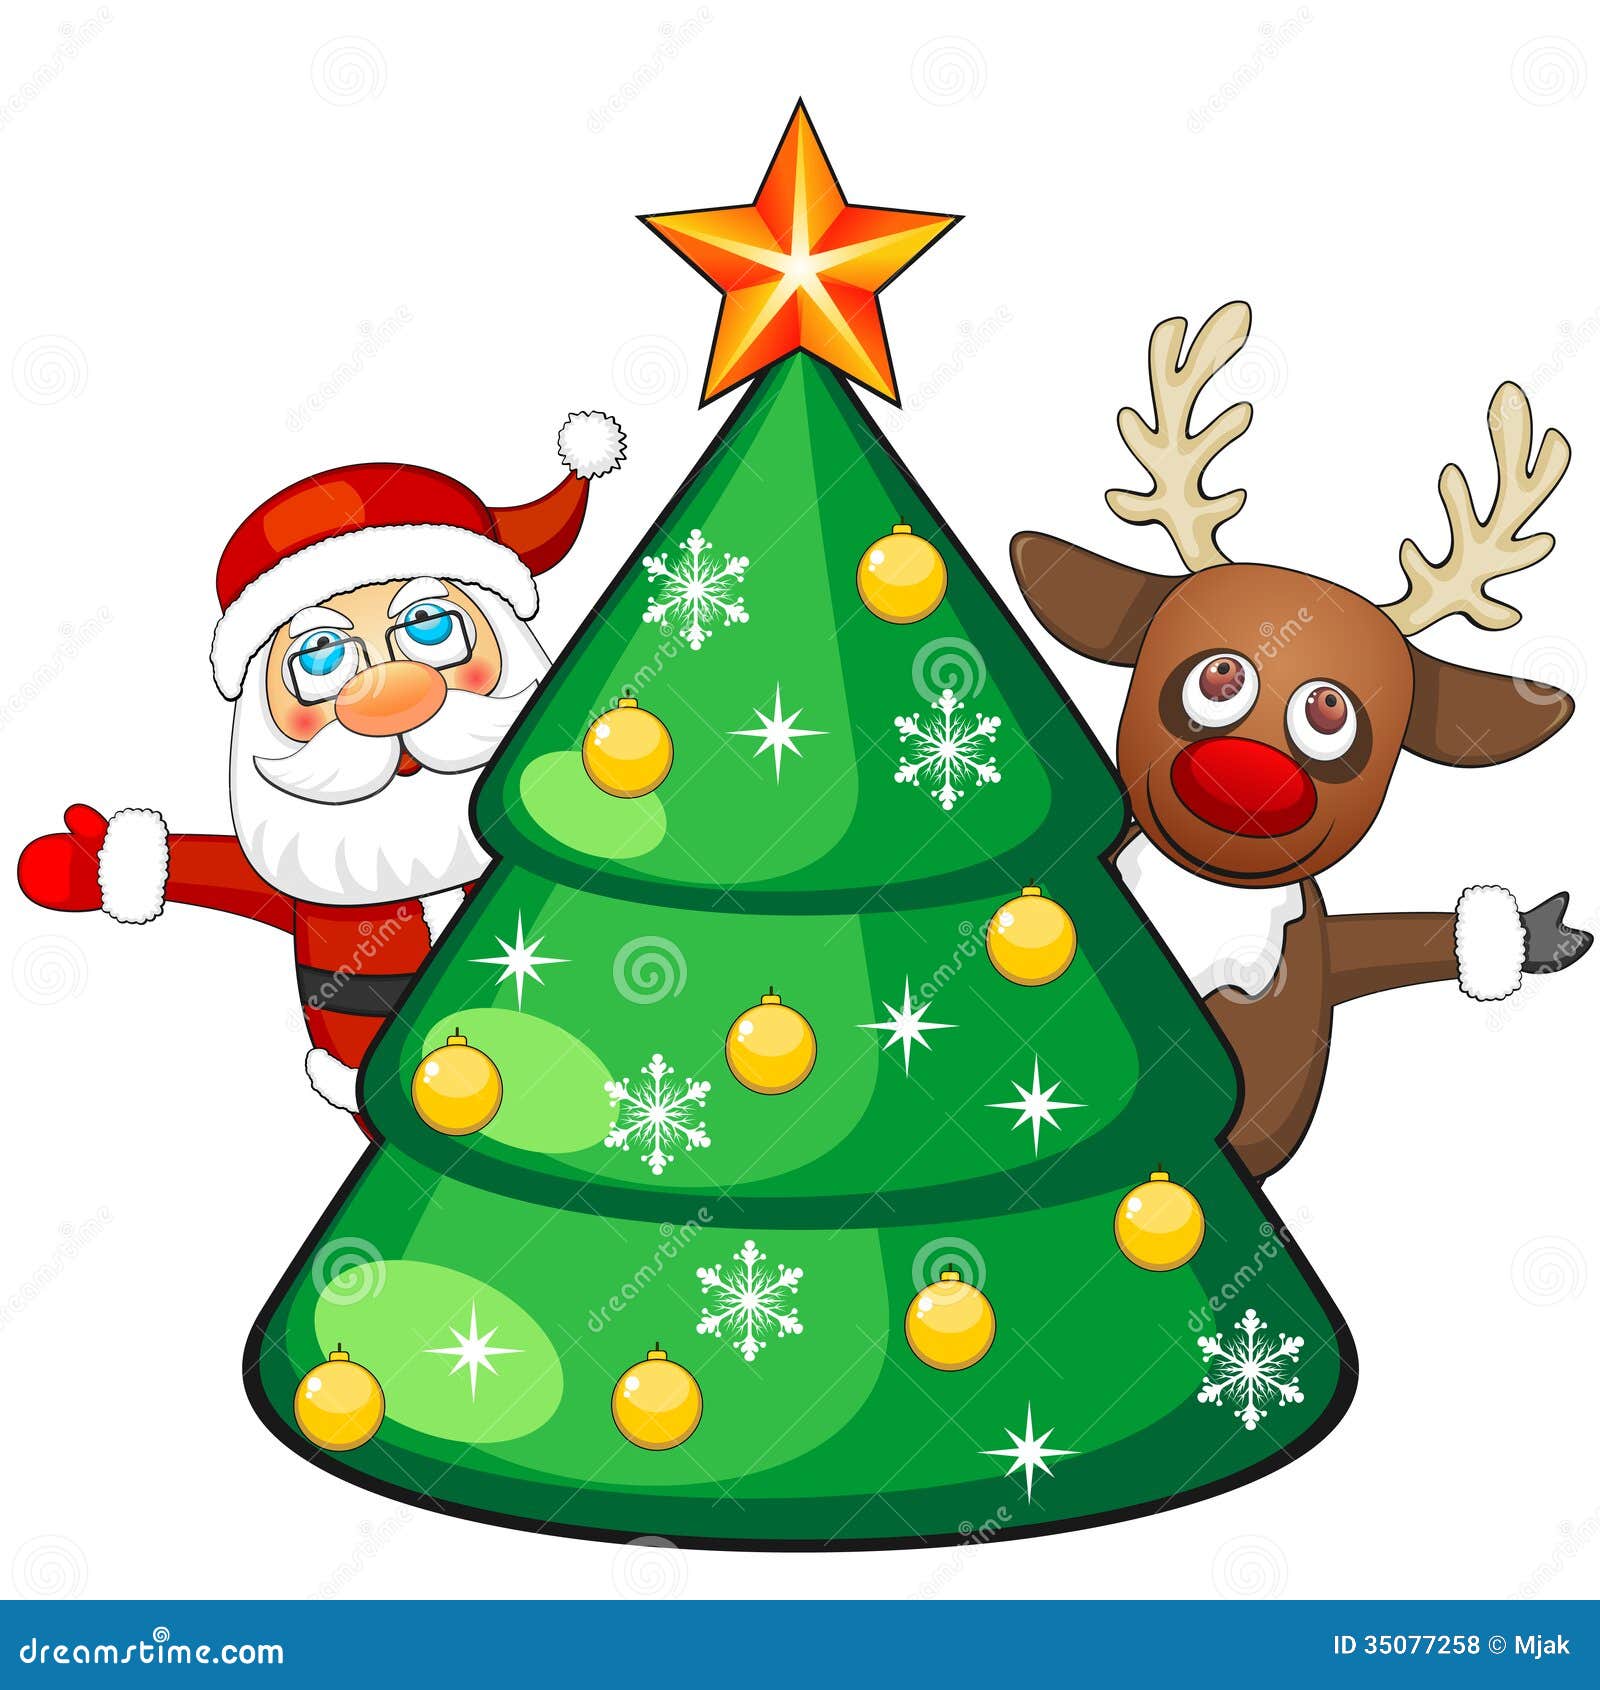 Deer And Santa Claus With Christmas Tree Stock Vector ...